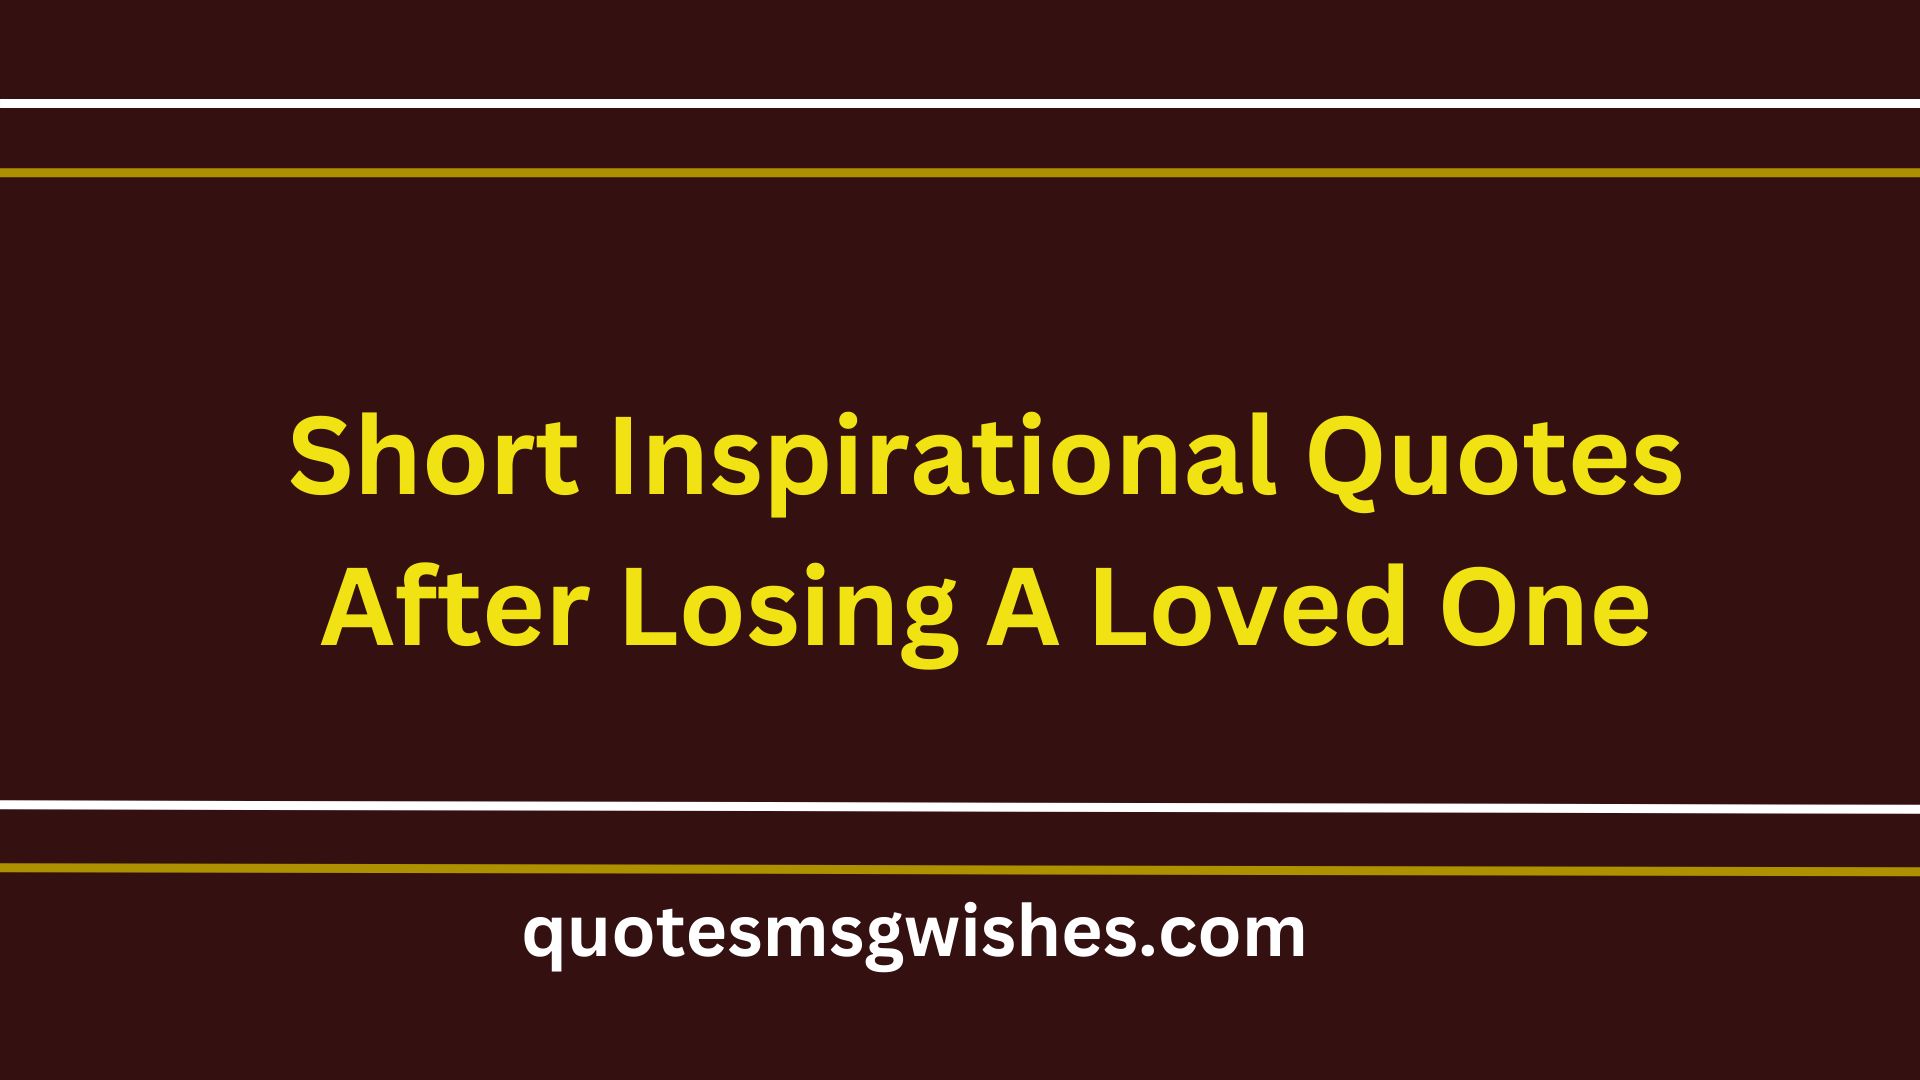 Short Inspirational Quotes After Losing A Loved One